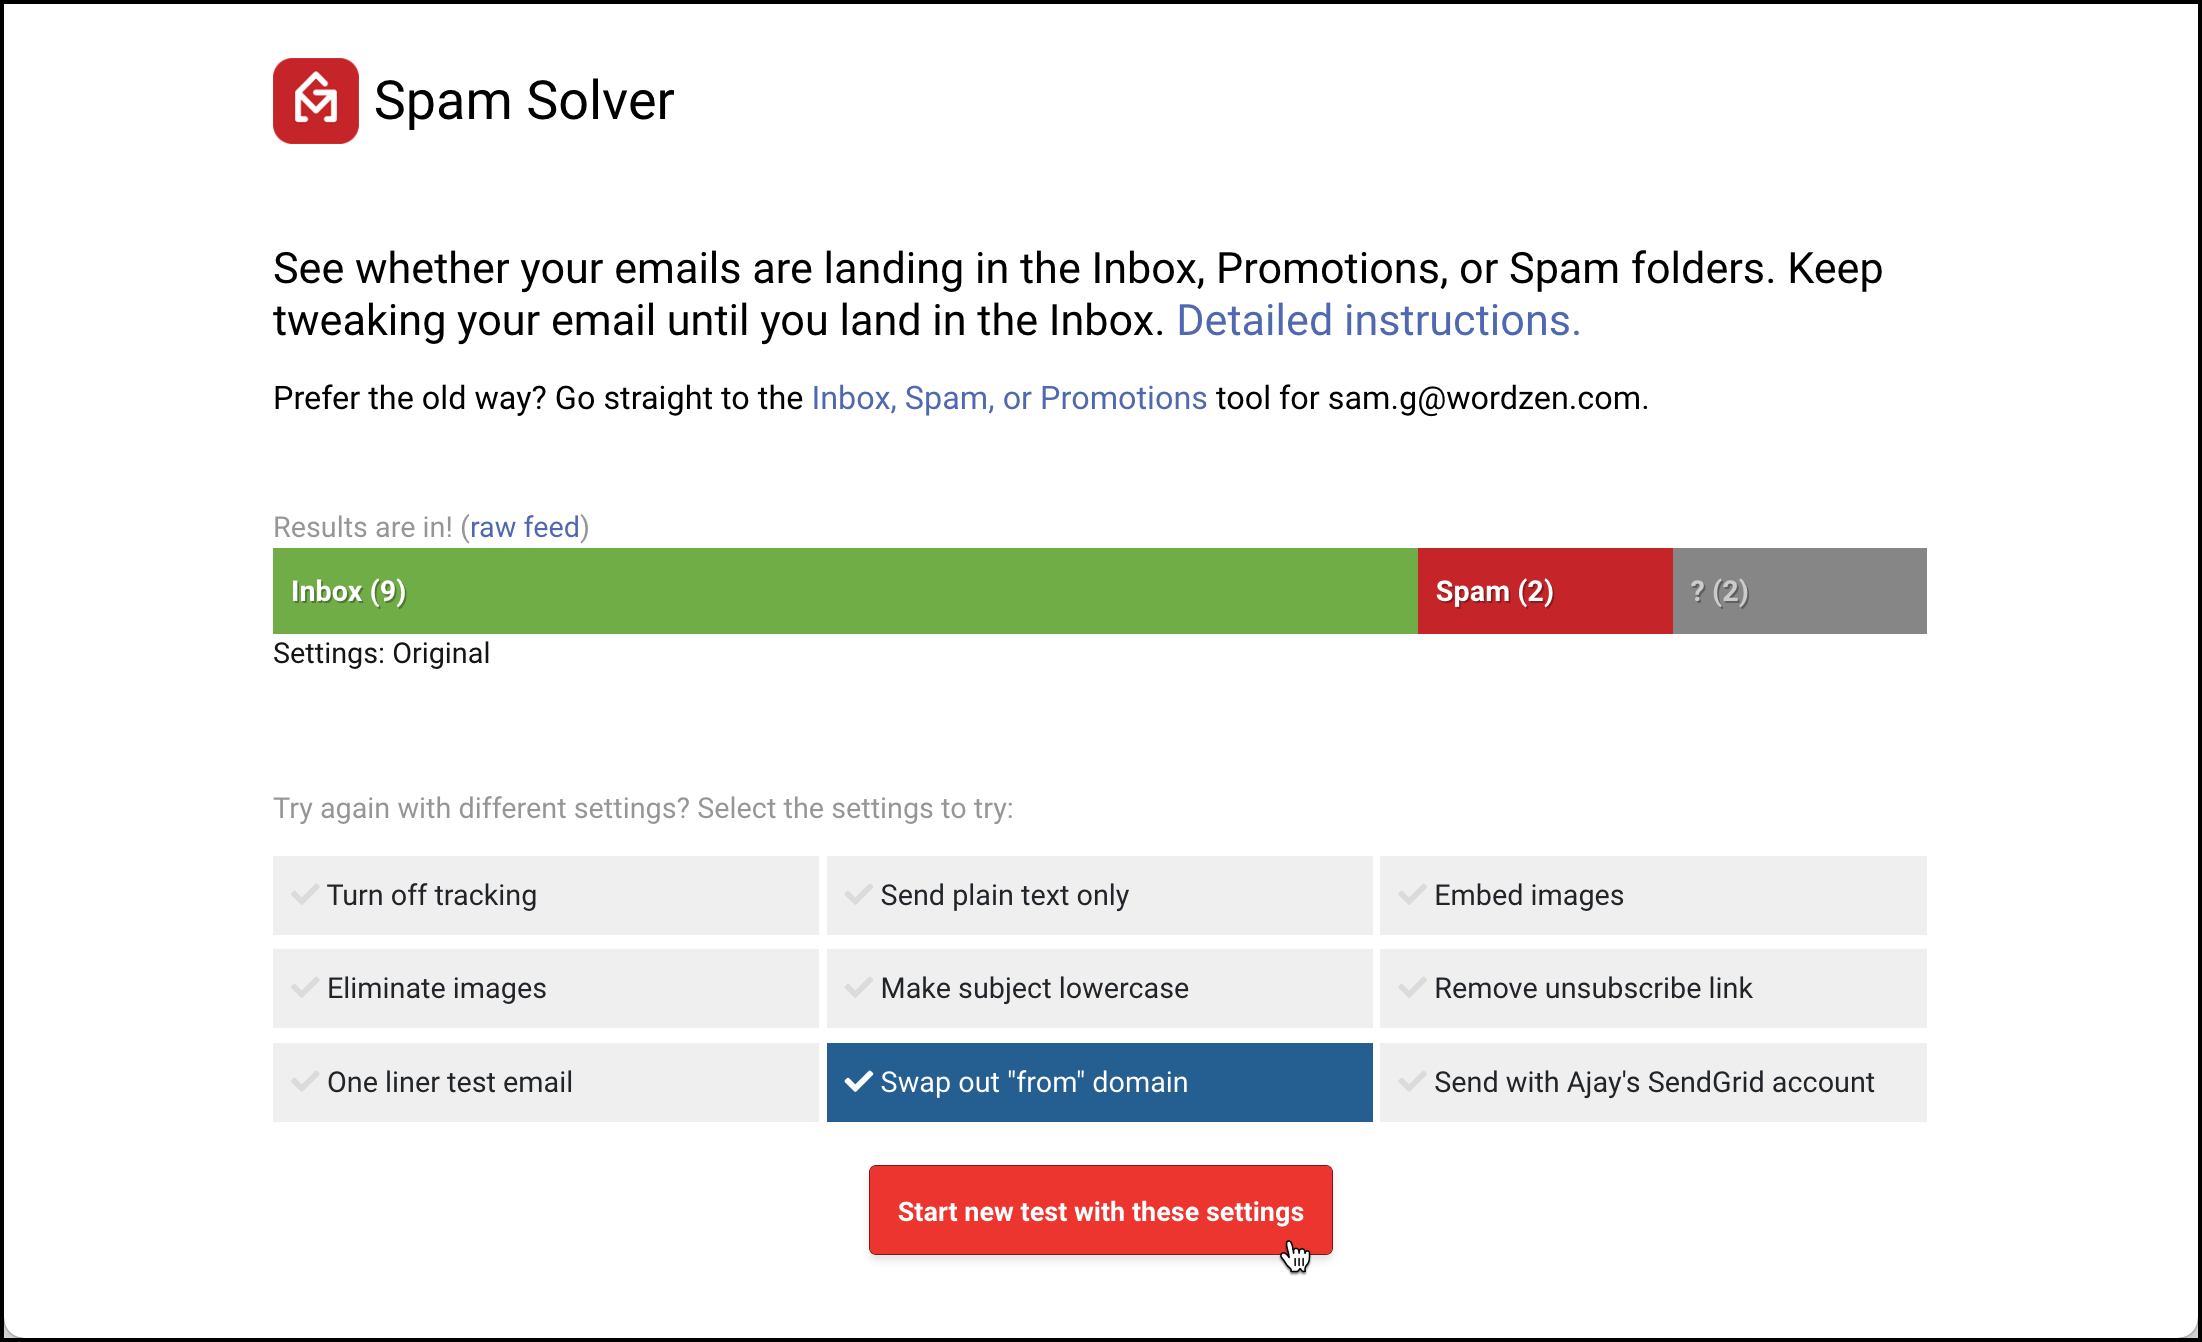 A Spam Solver analysis and strategy